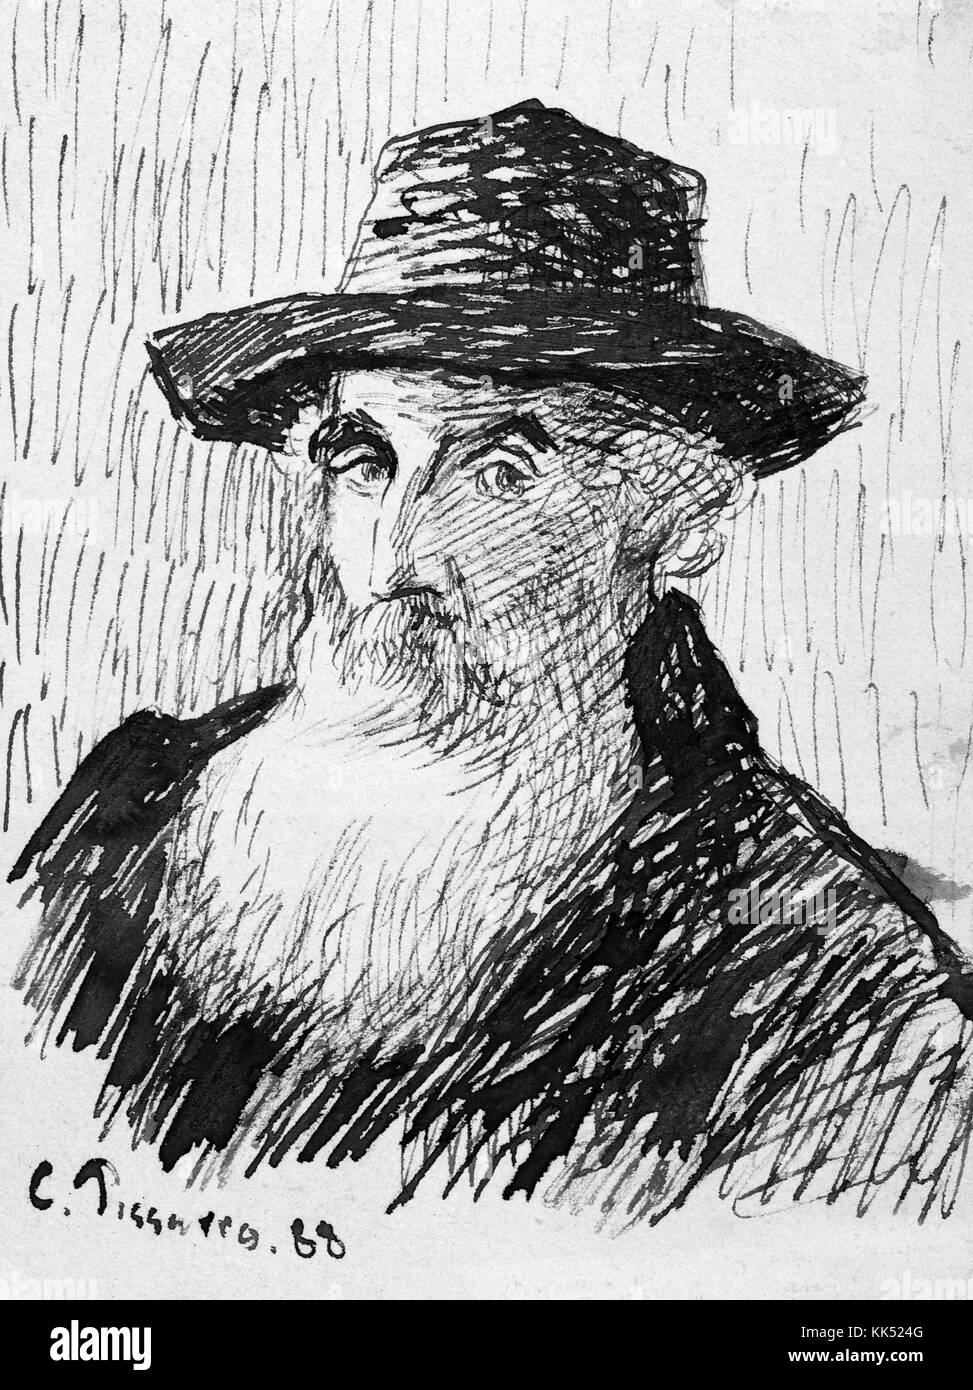 Ink drawn self portrait of Camille Pissarro, Danish-French Impressionist and Neo-Impressionist painter, wearing a hat, long white beard, 1888. From the New York Public Library. Stock Photo